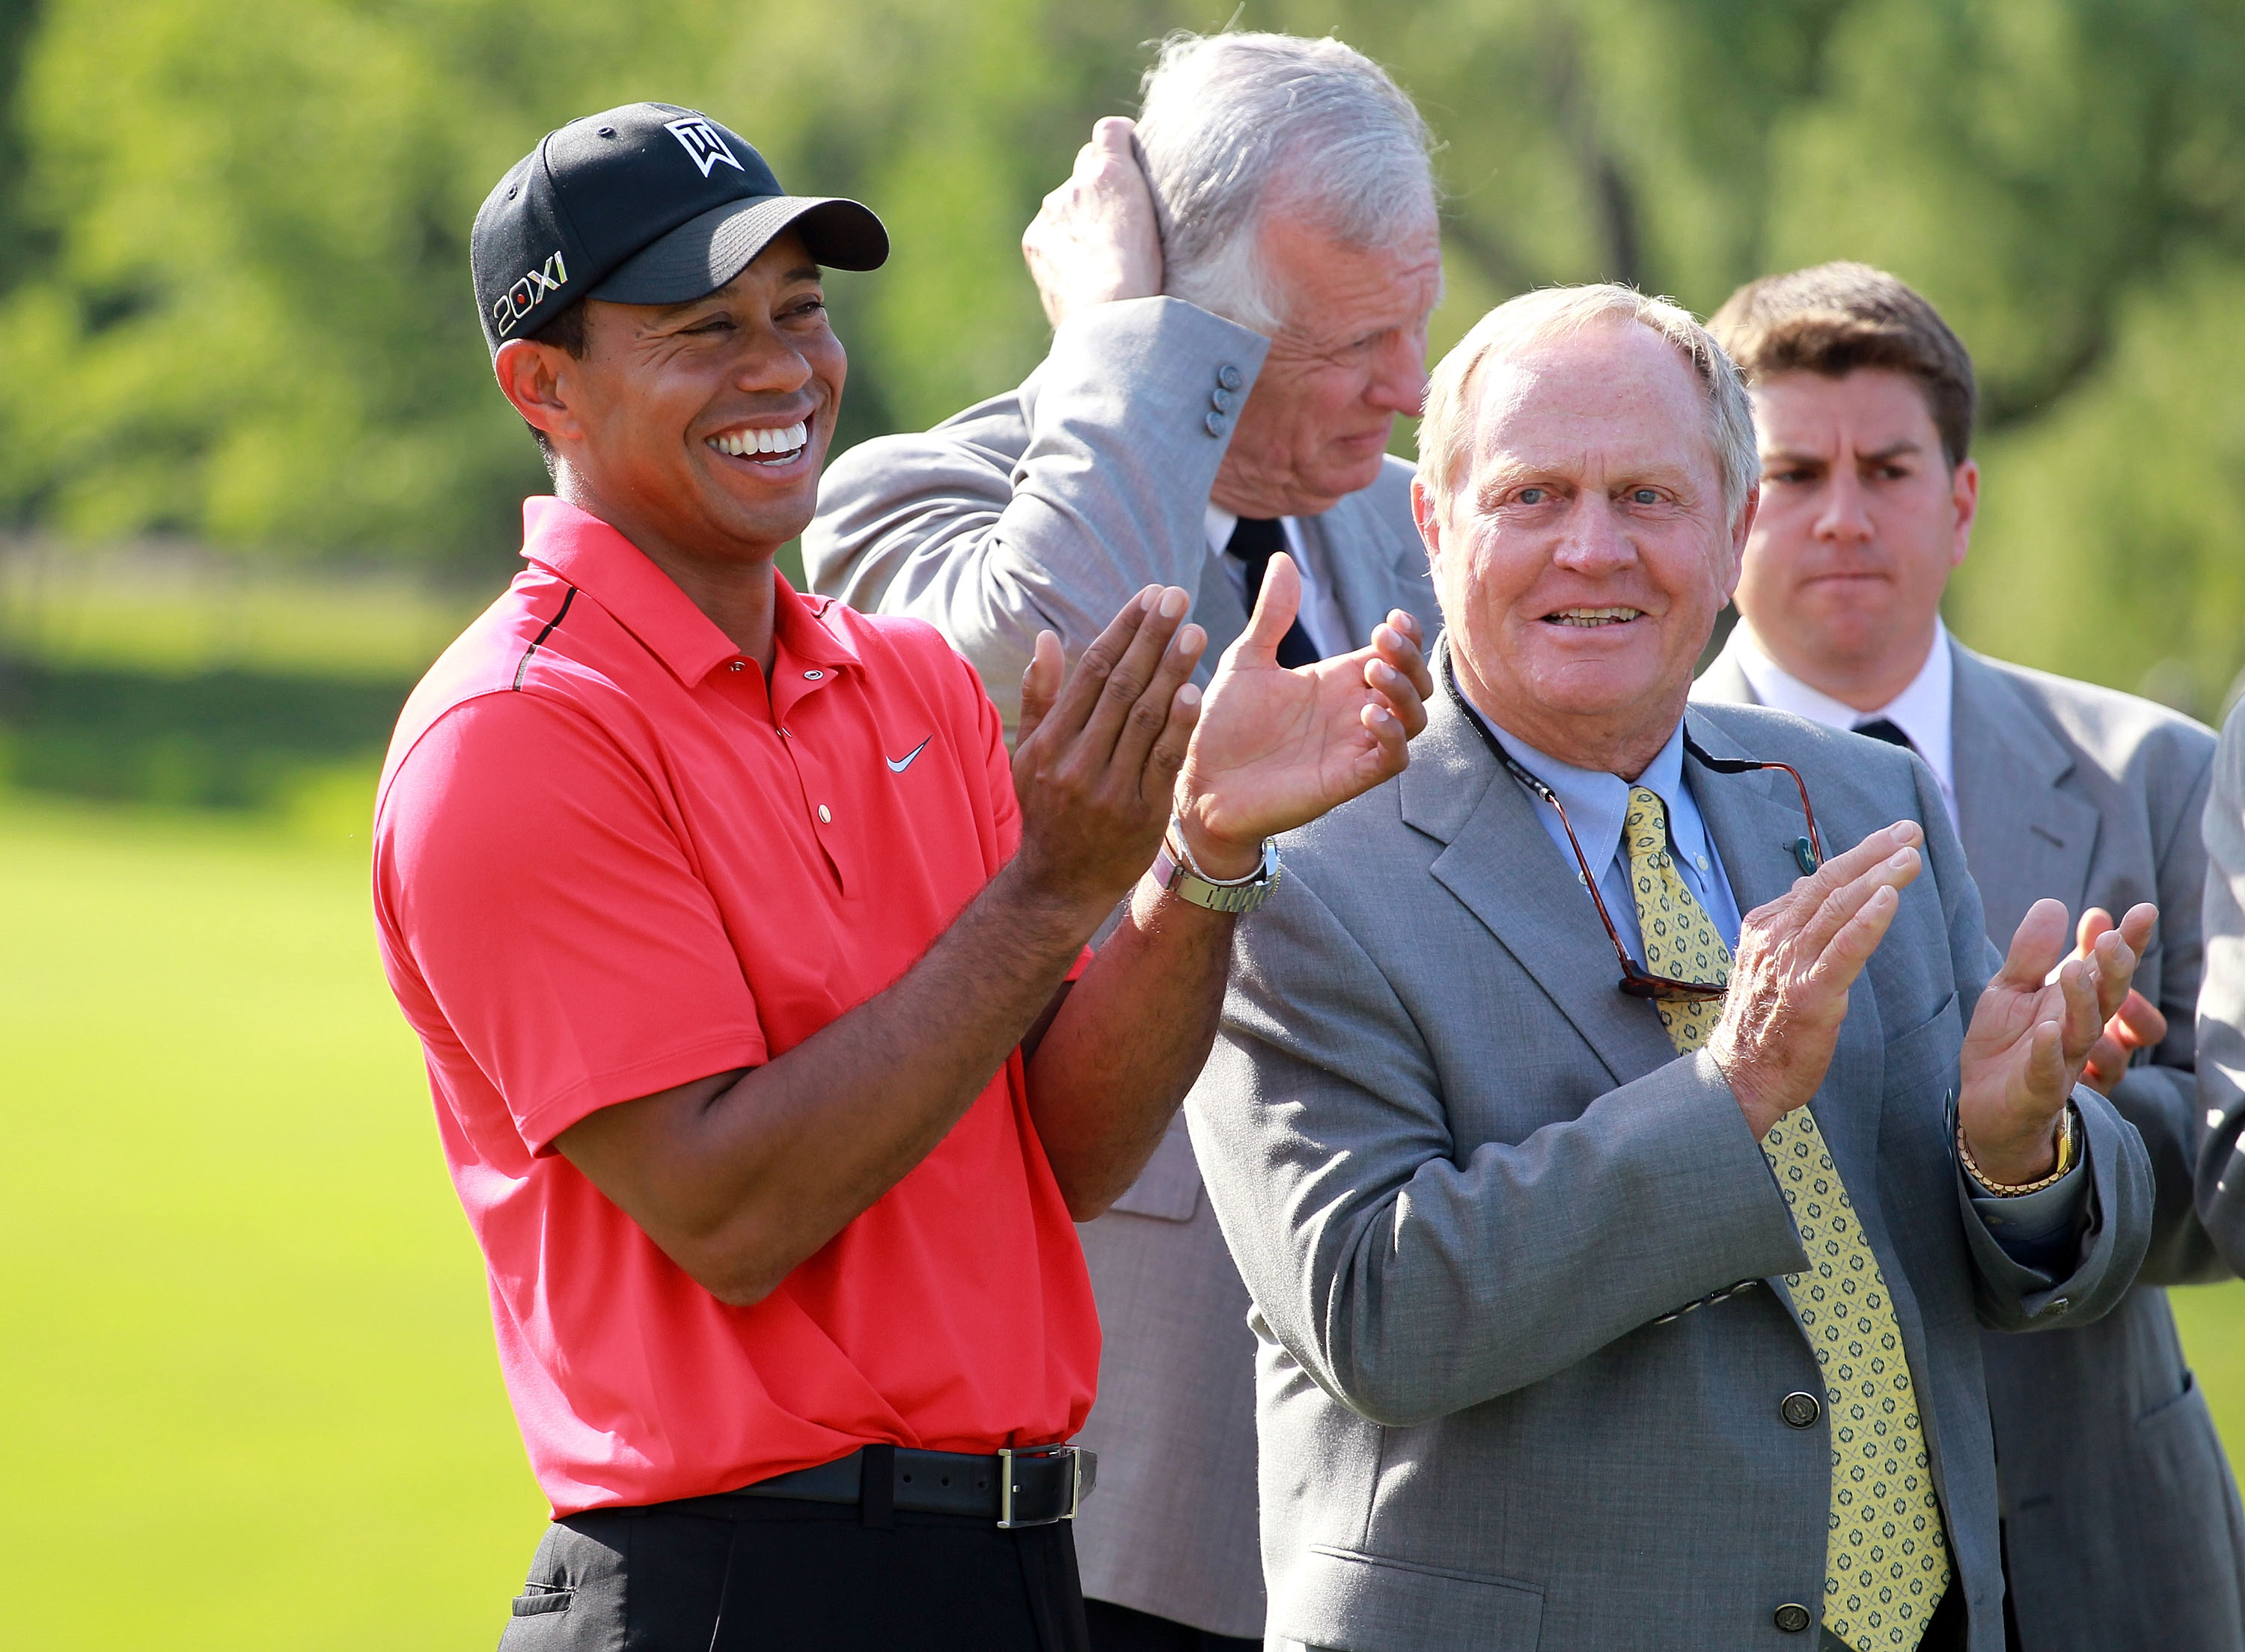 Tiger Woods is back this weekend at The Memorial Tournament, where in 2012 he hit the greatest shot Jack Nicklaus has ever seen.